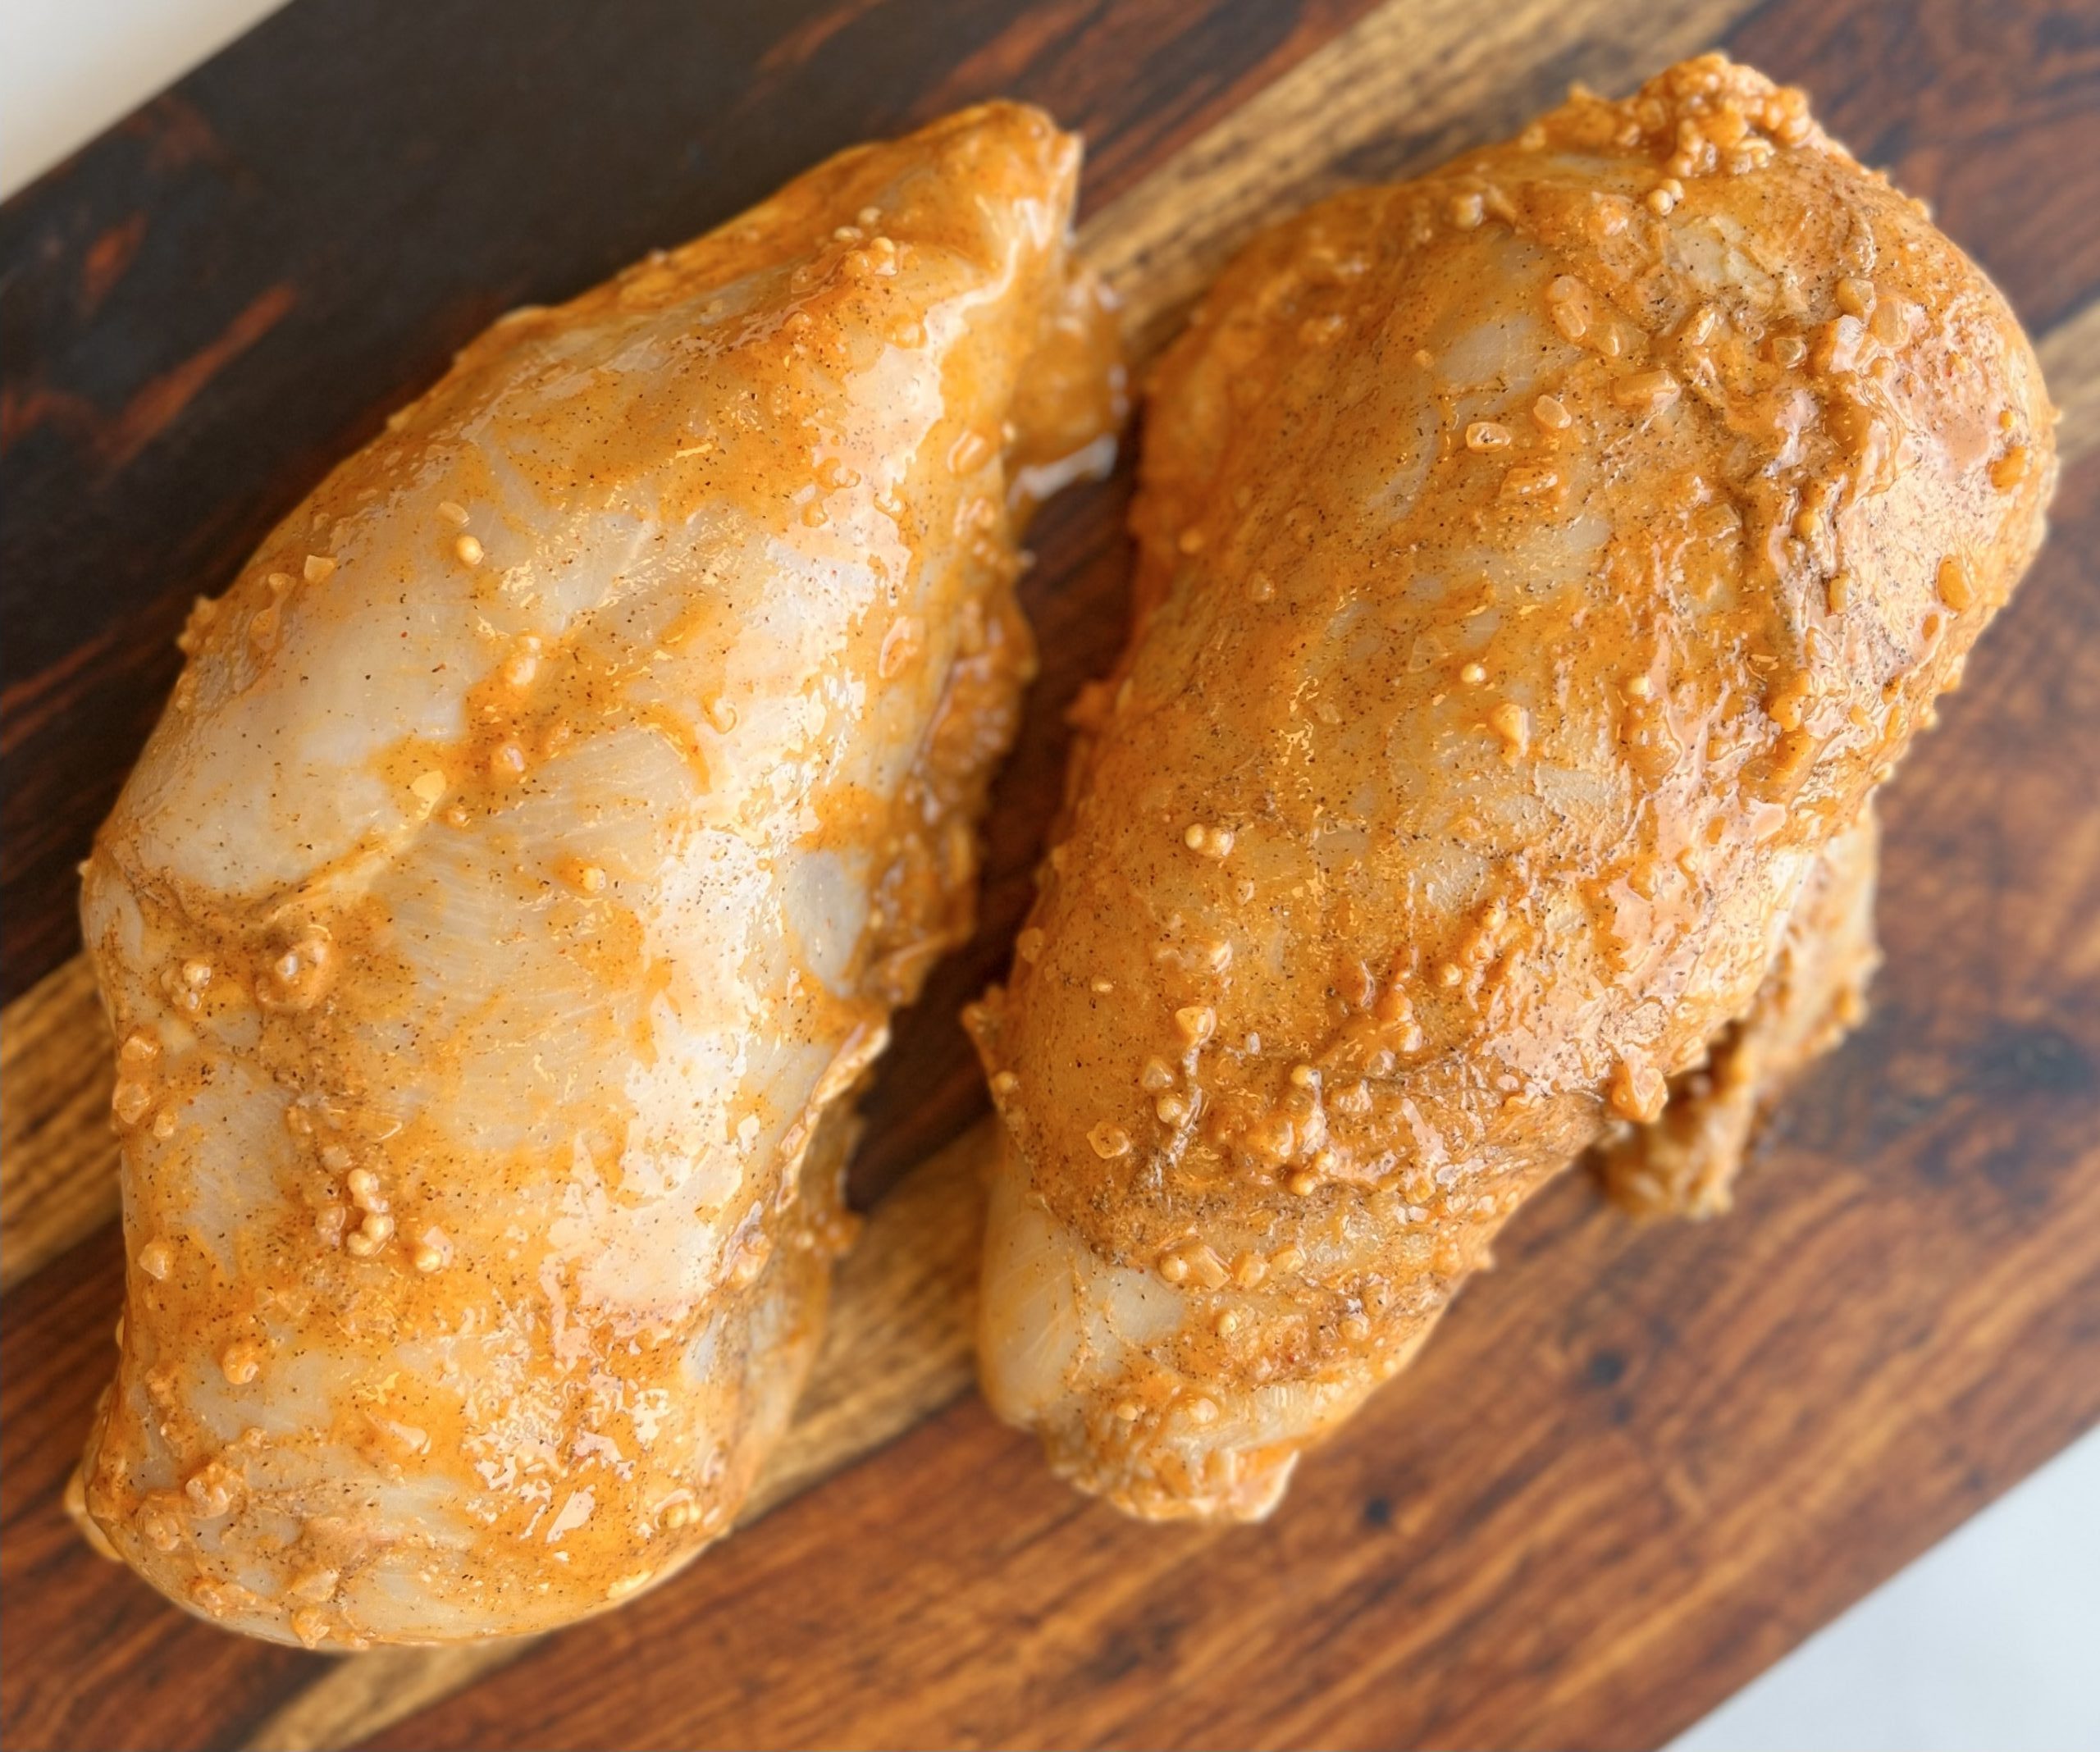 Marinated chicken breasts. Many flavors to choose from. Chicken is all natural, no hormones or antibiotics added.